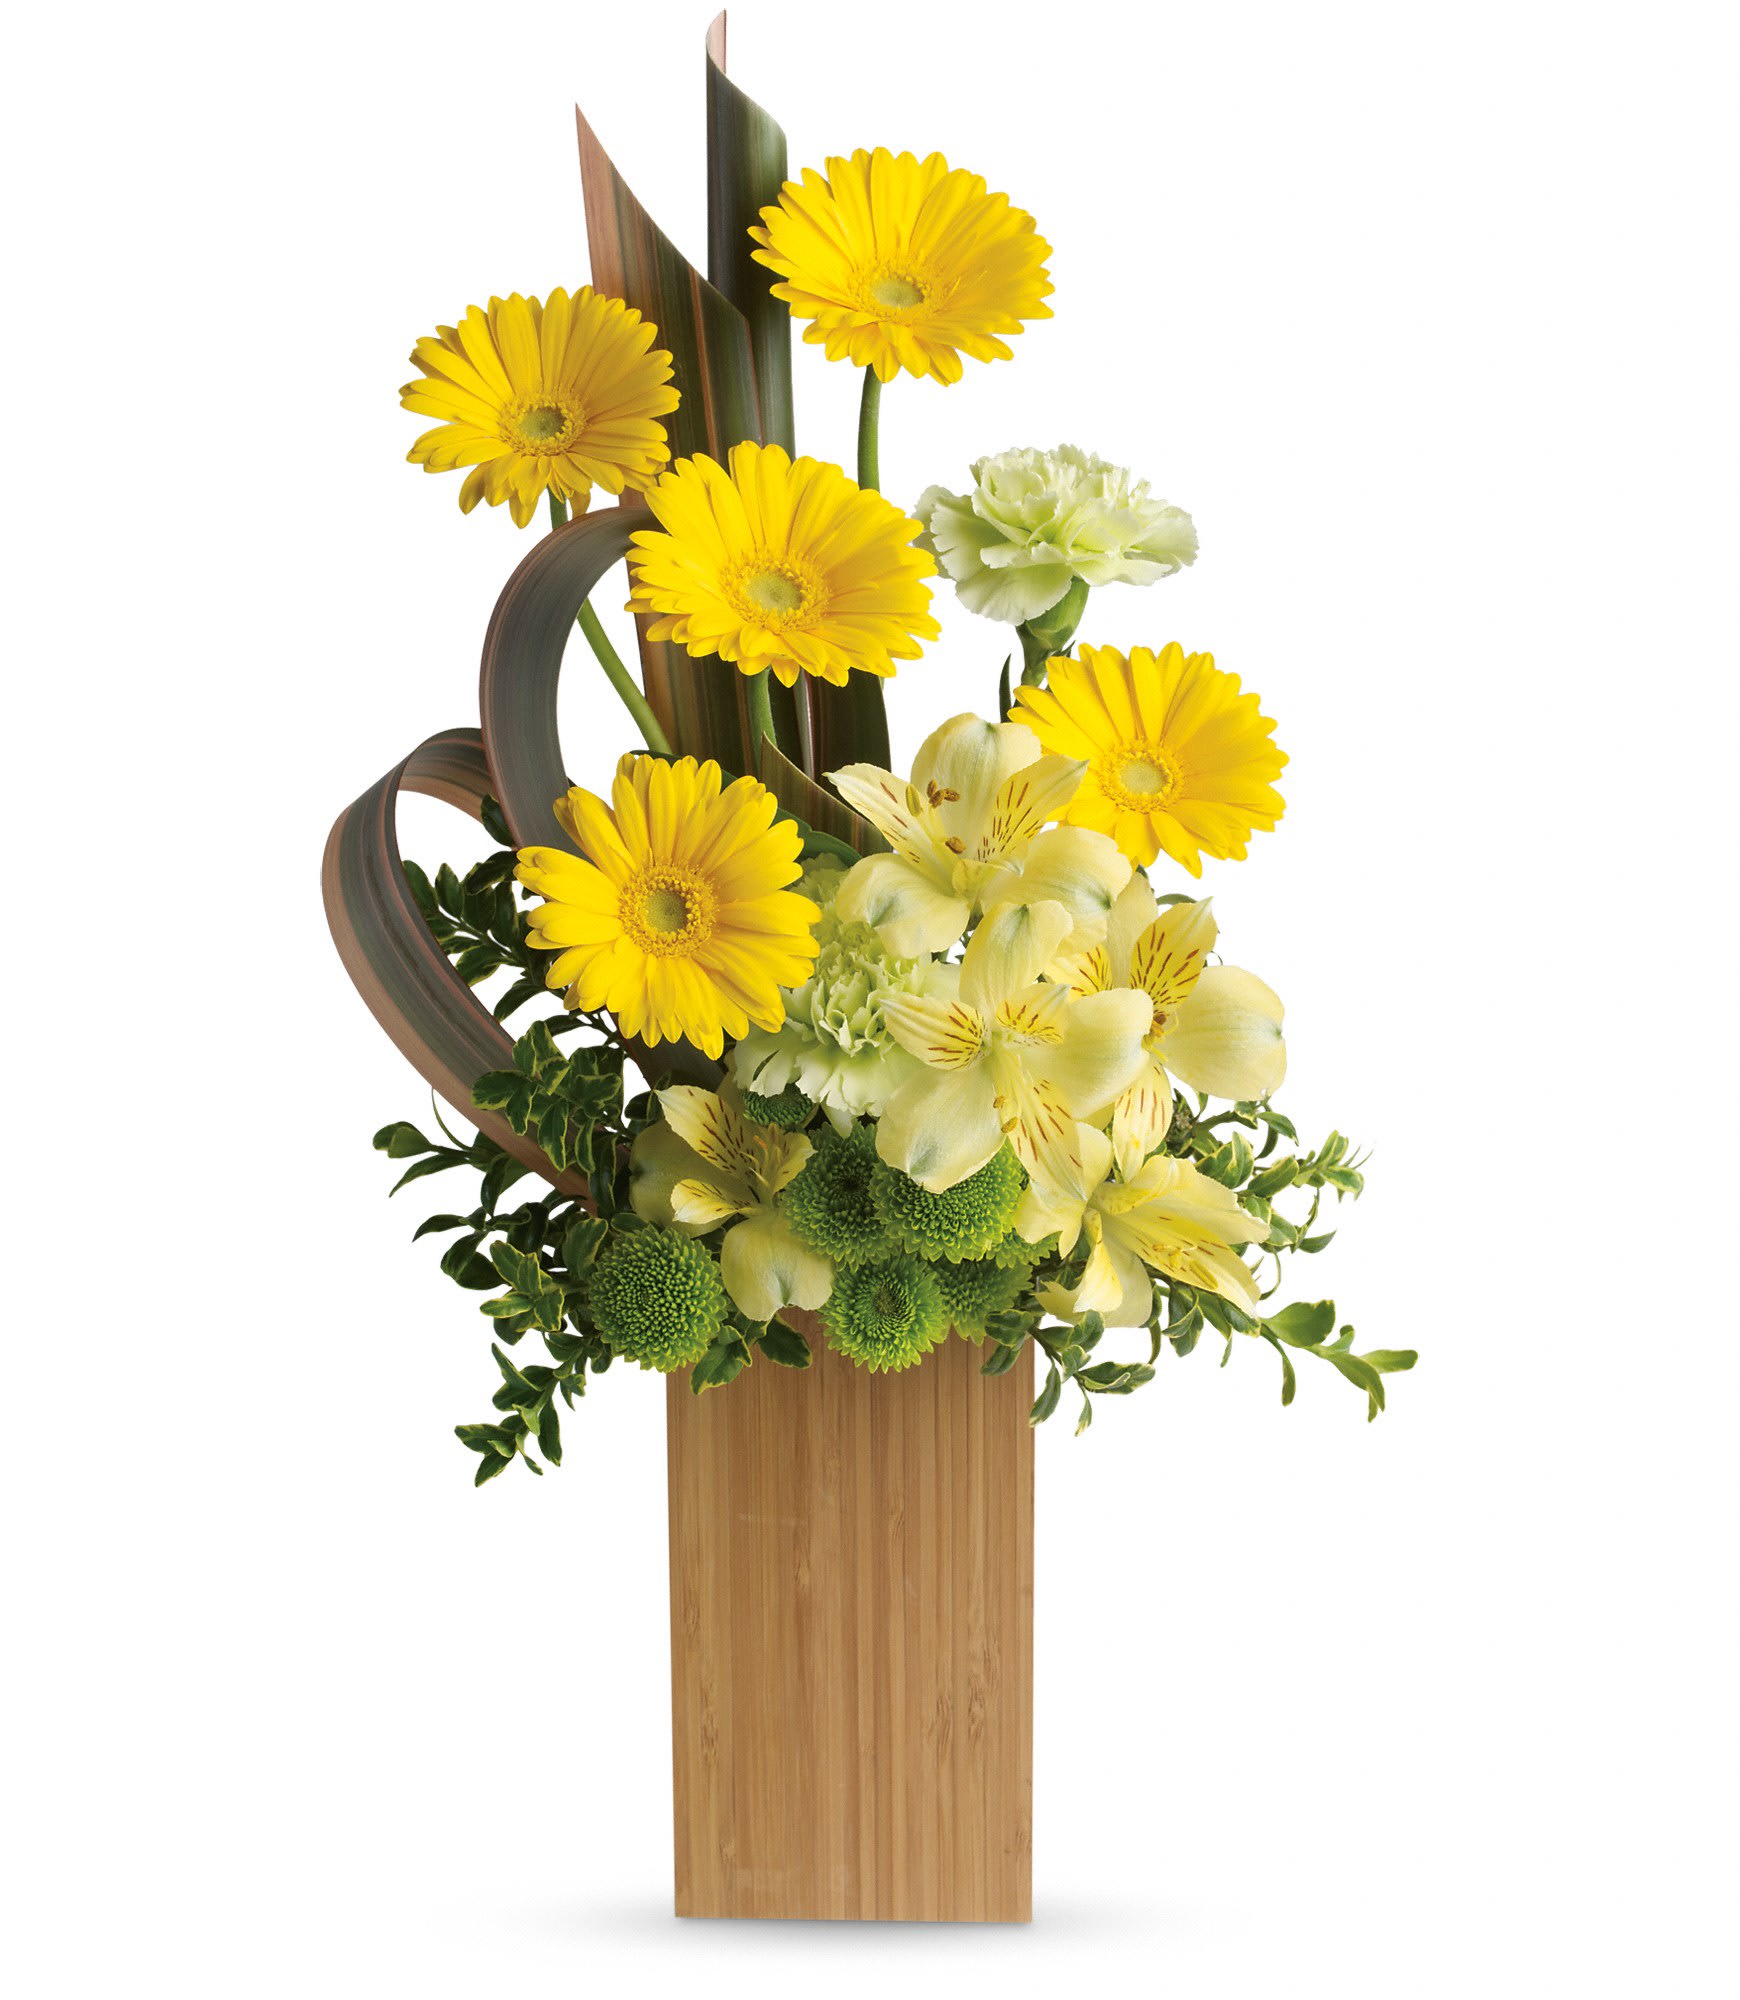 Sunbeams and Smiles by Teleflora - Send smiles across the miles. This artful arrangement of sunny yellow blooms in a modern bamboo vase is specially designed to warm hearts and brighten days!  